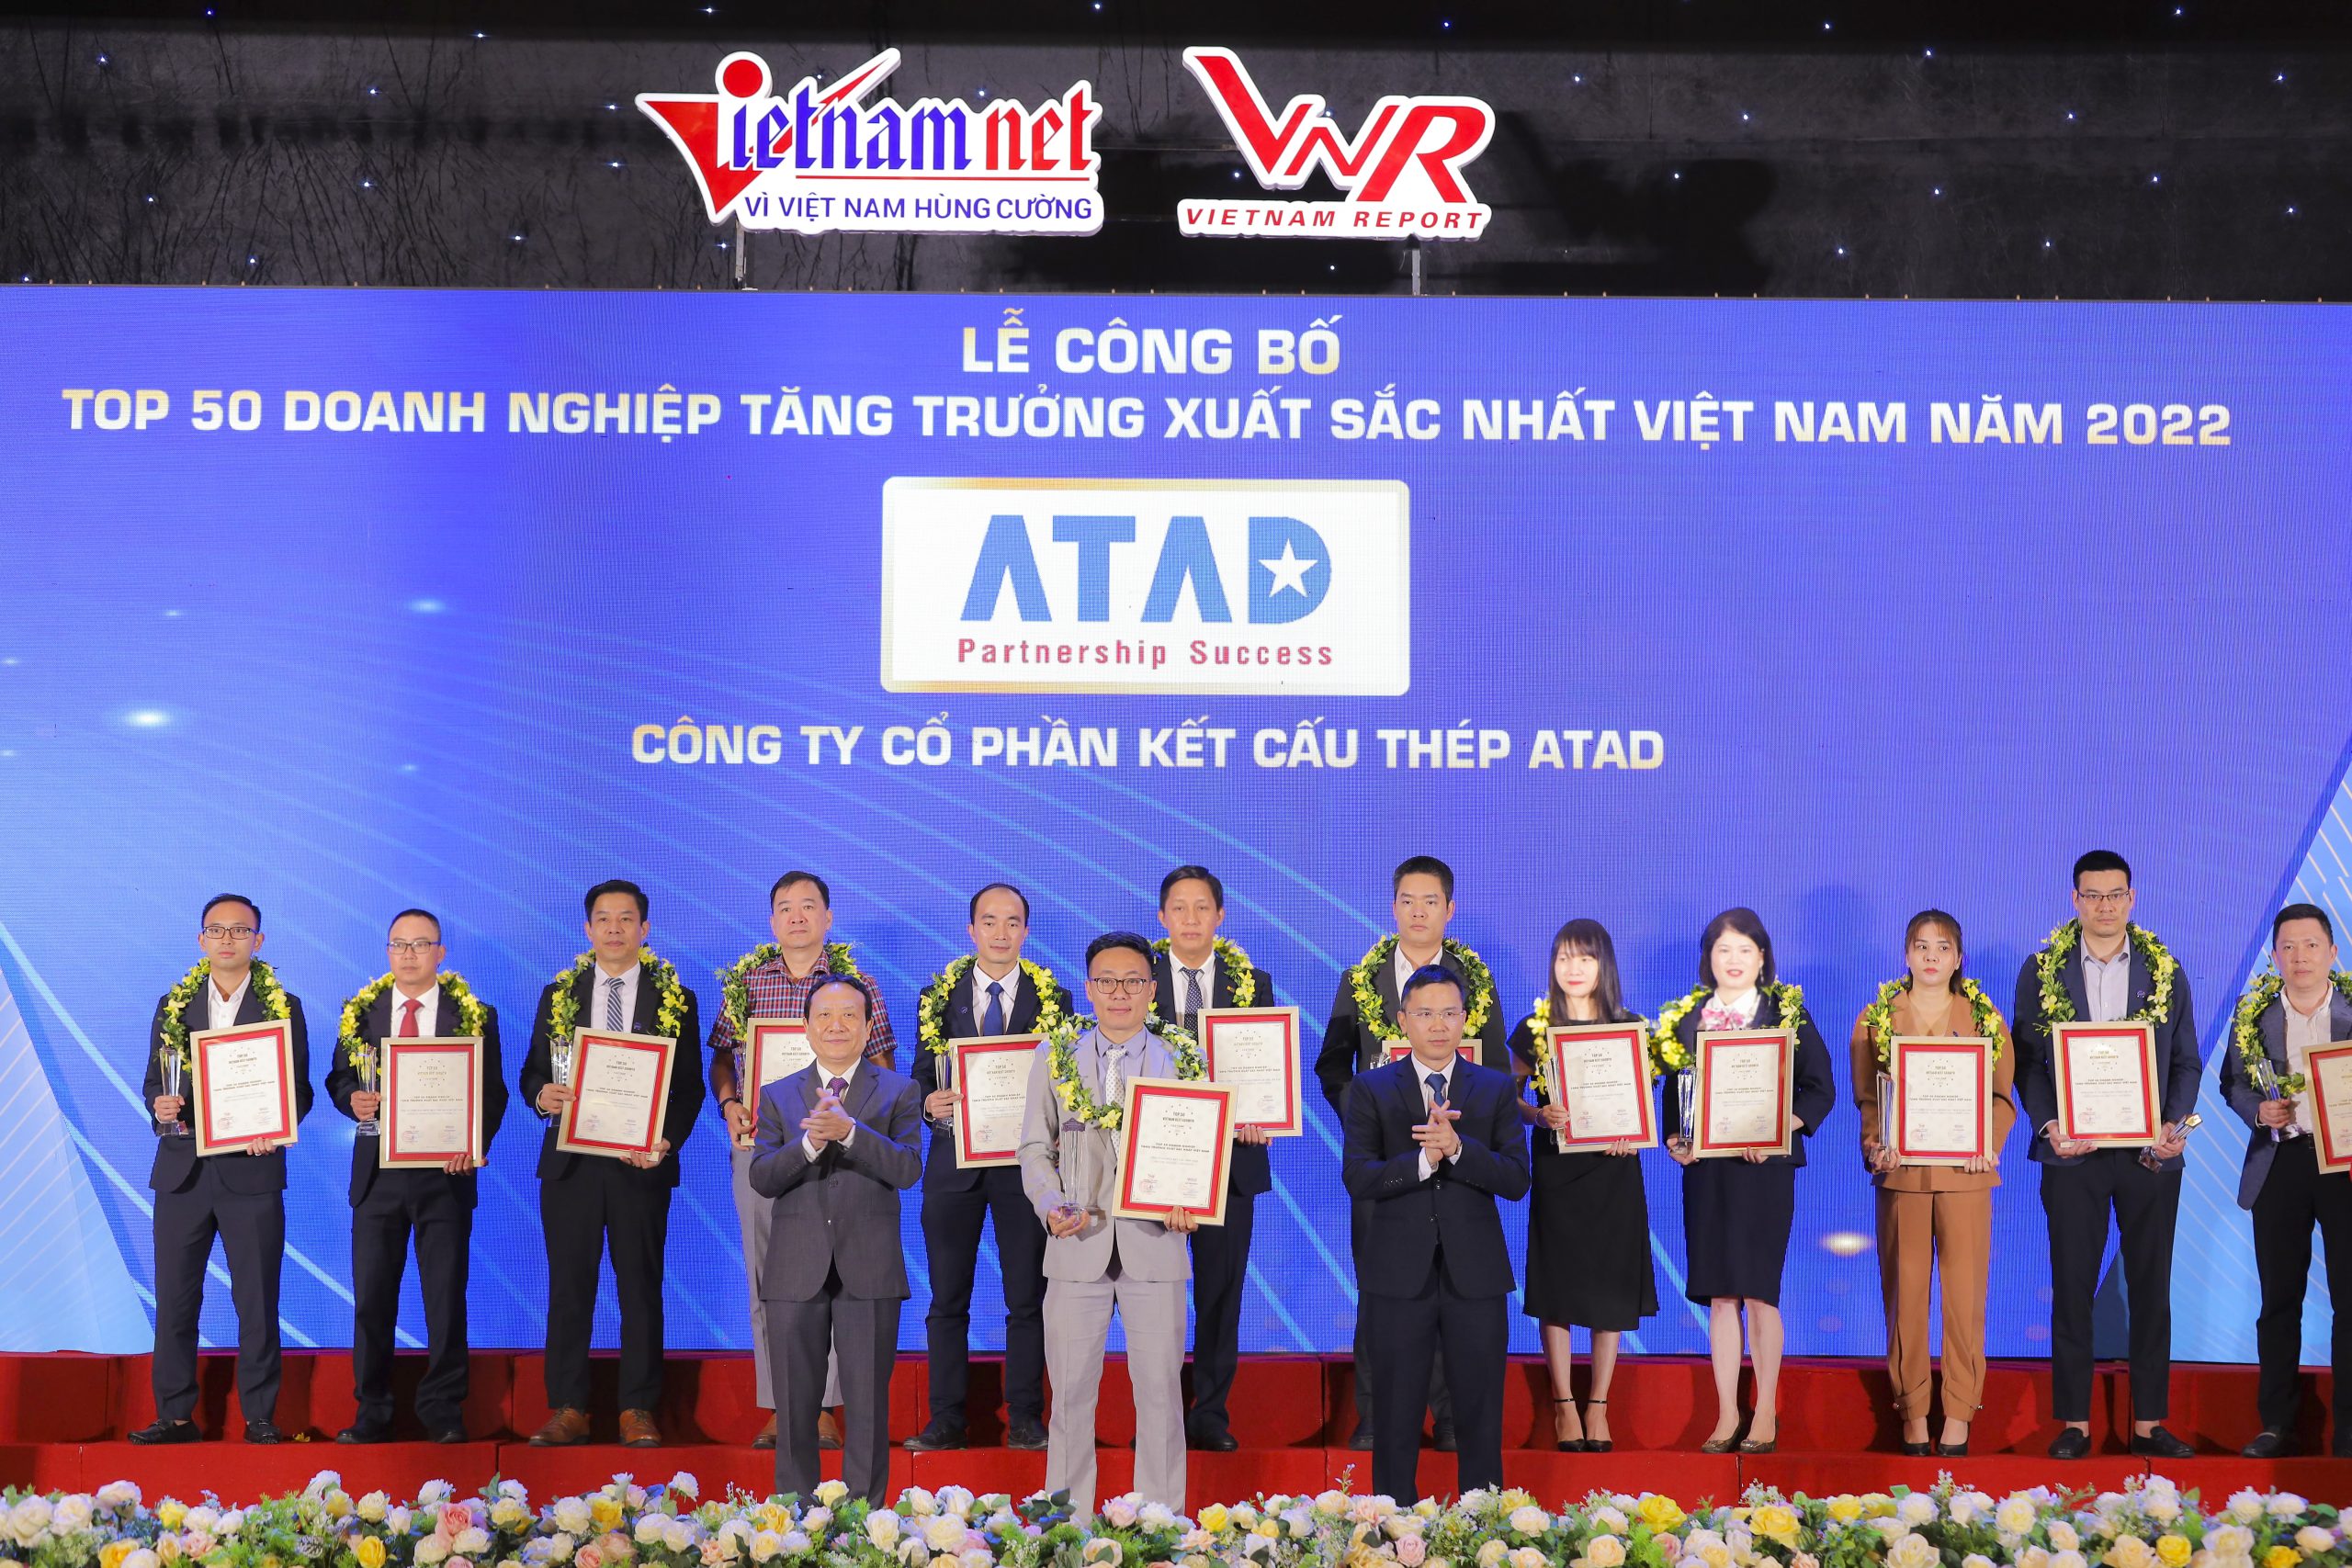 ATAD MARKS 5TH CONSECUTIVE YEAR AMONG TOP 50 VIETNAM BEST GROWTH 1